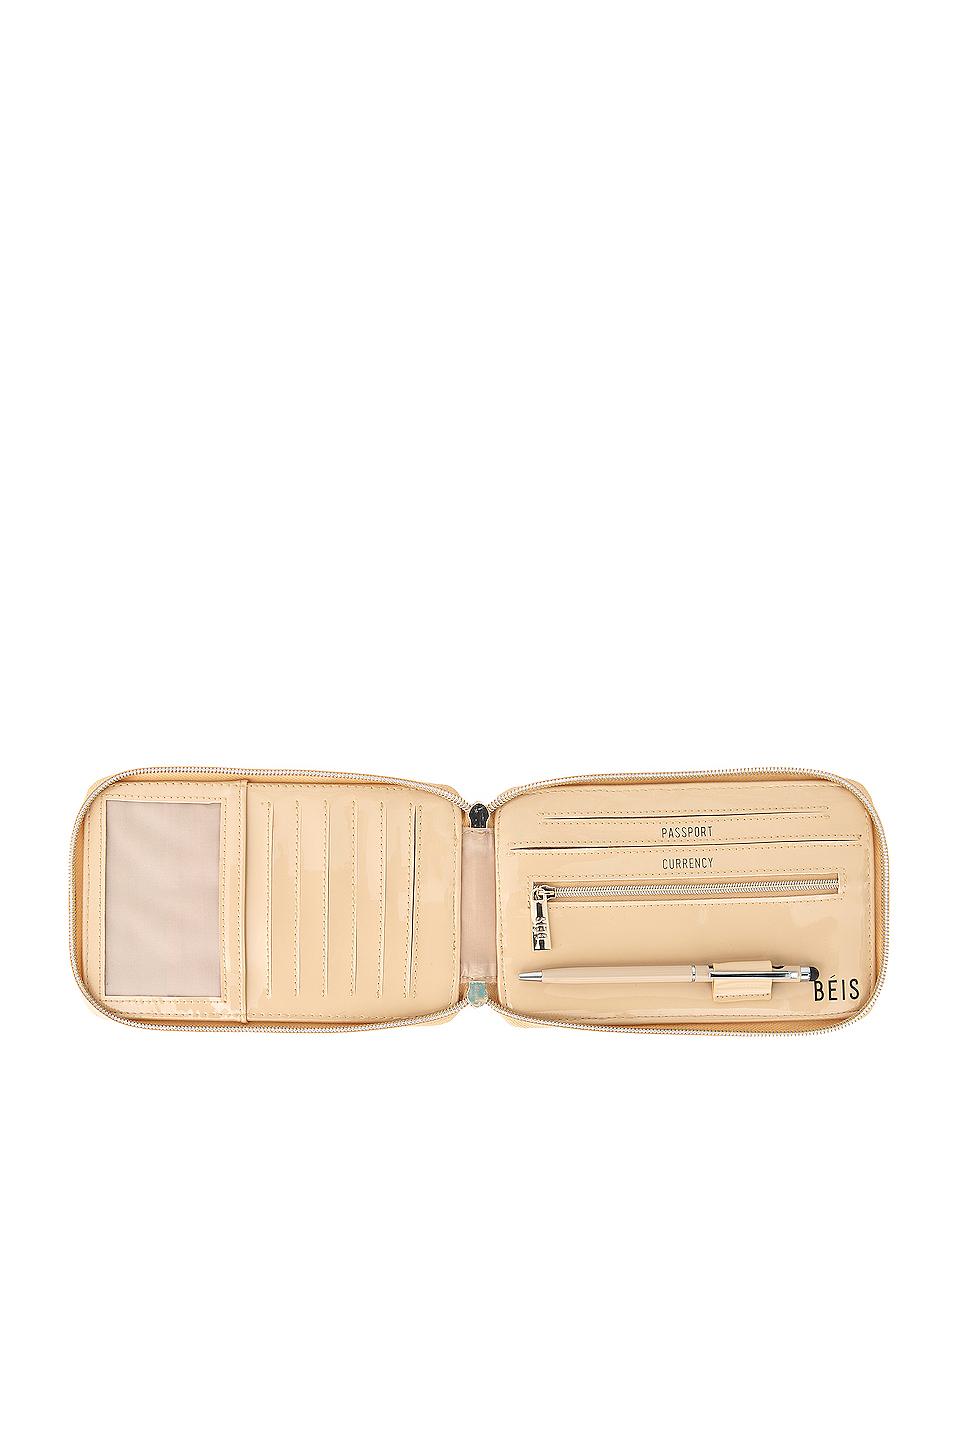 BEIS Travel Wallet in Natural | Lyst